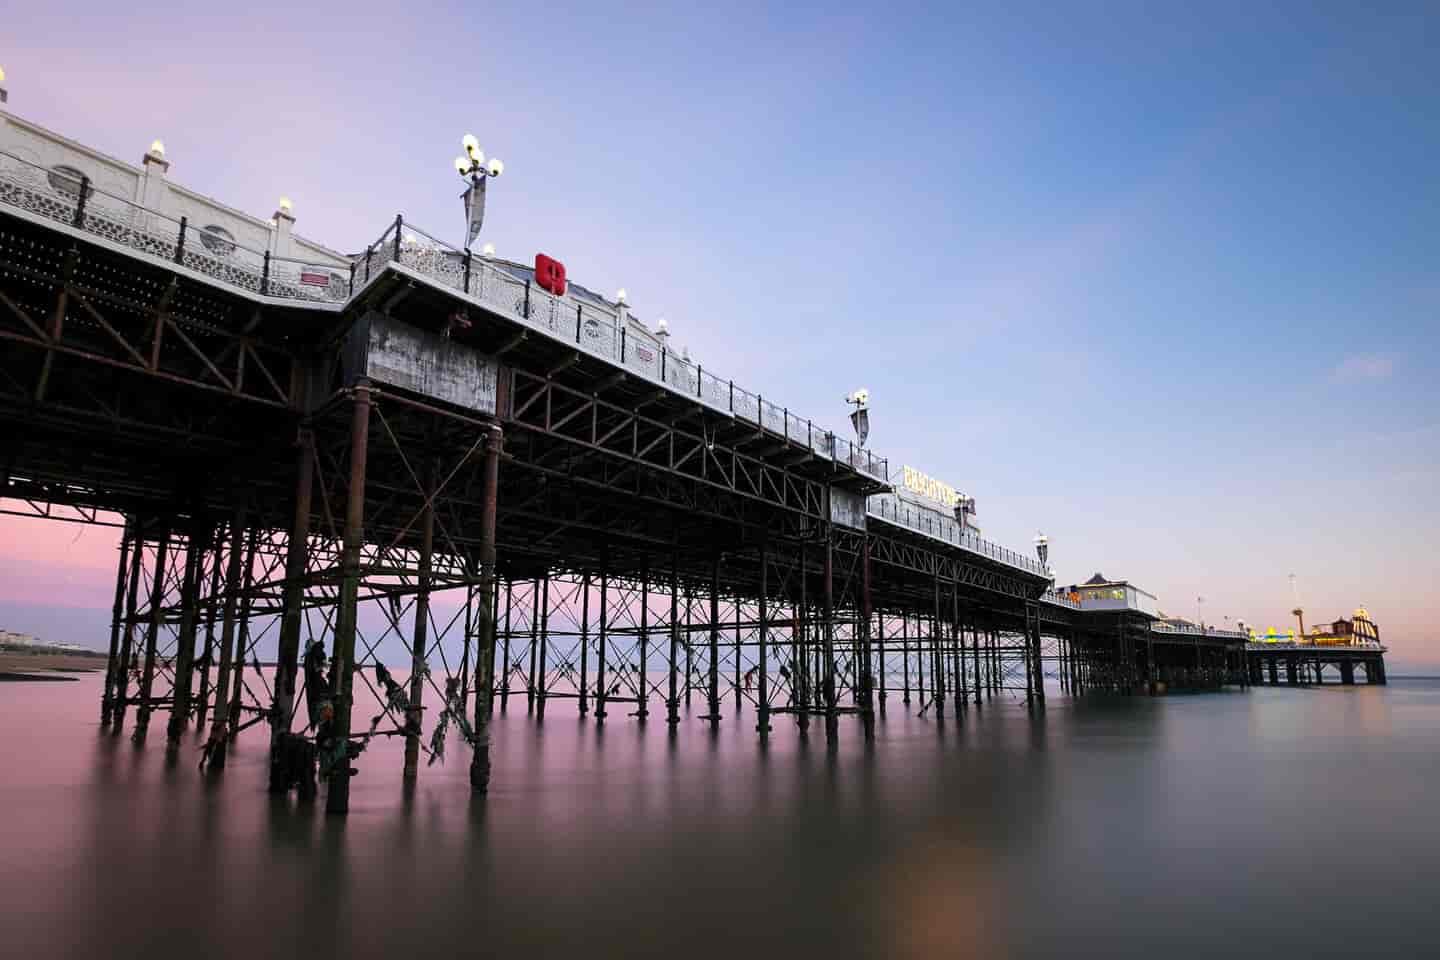 Student Accommodation in Brighton - Brighton Pier at low tide